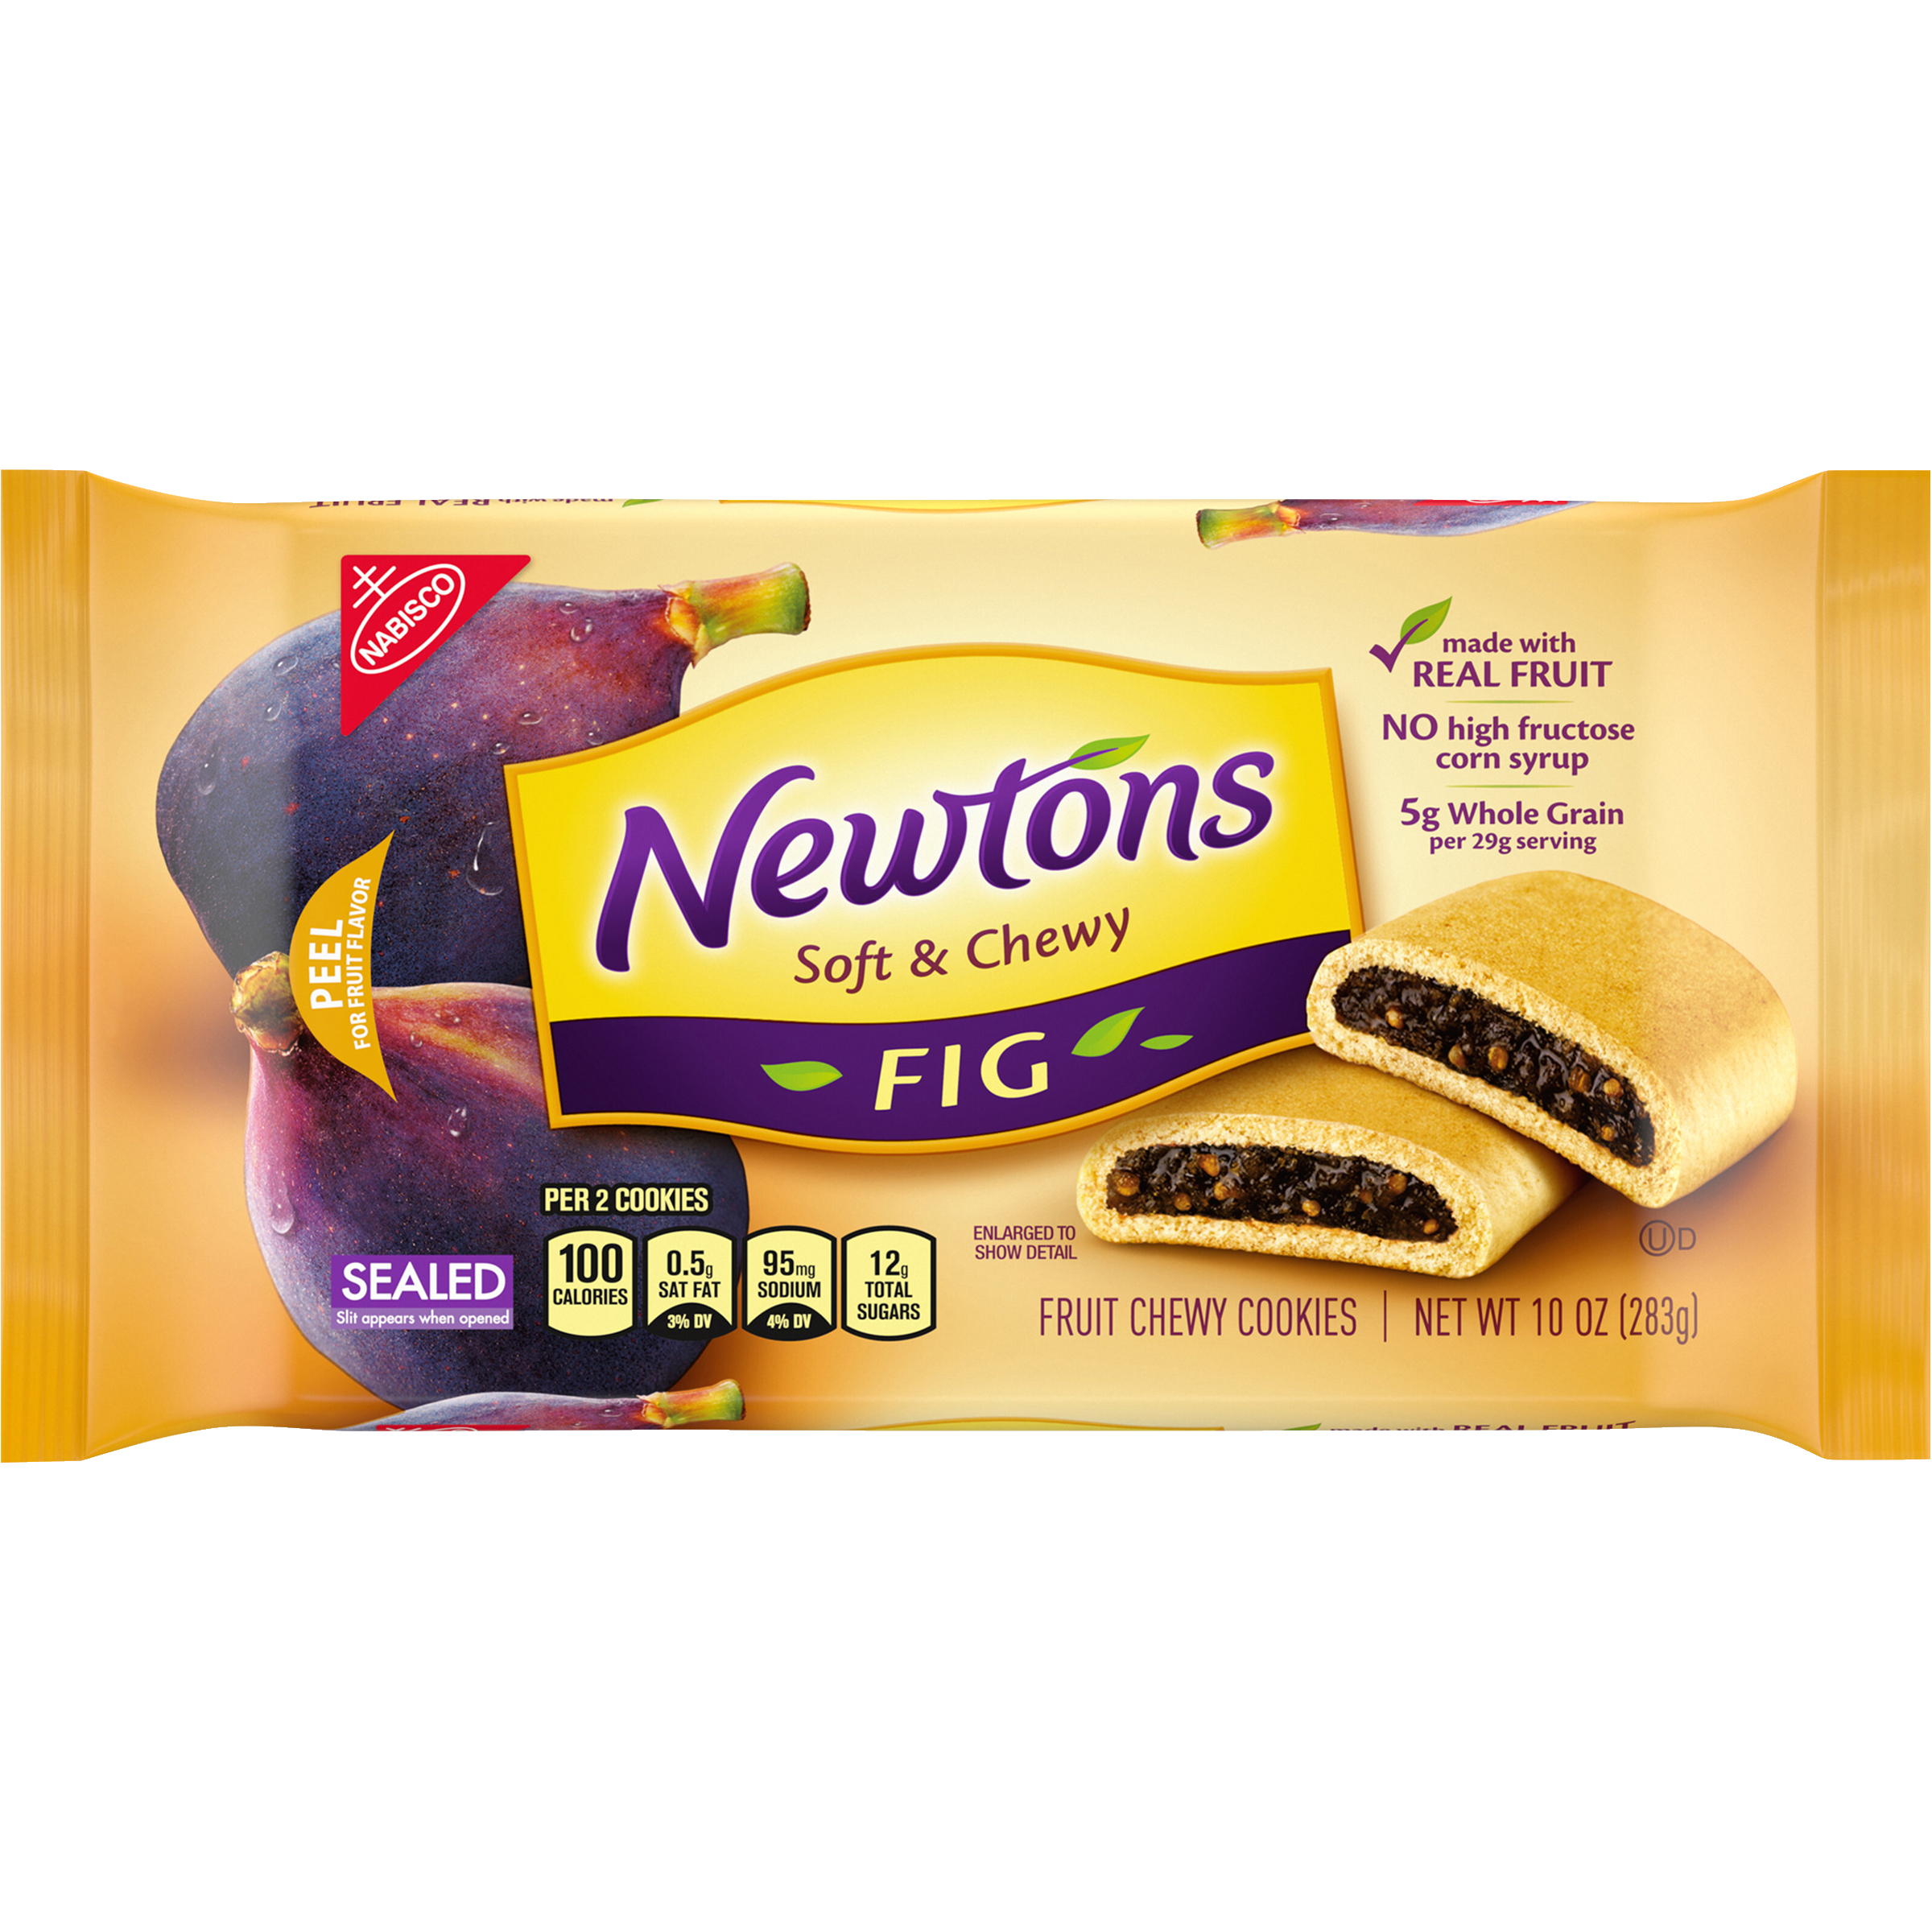 Newtons Soft & Fruit Chewy Fig Cookies, 10 oz-1